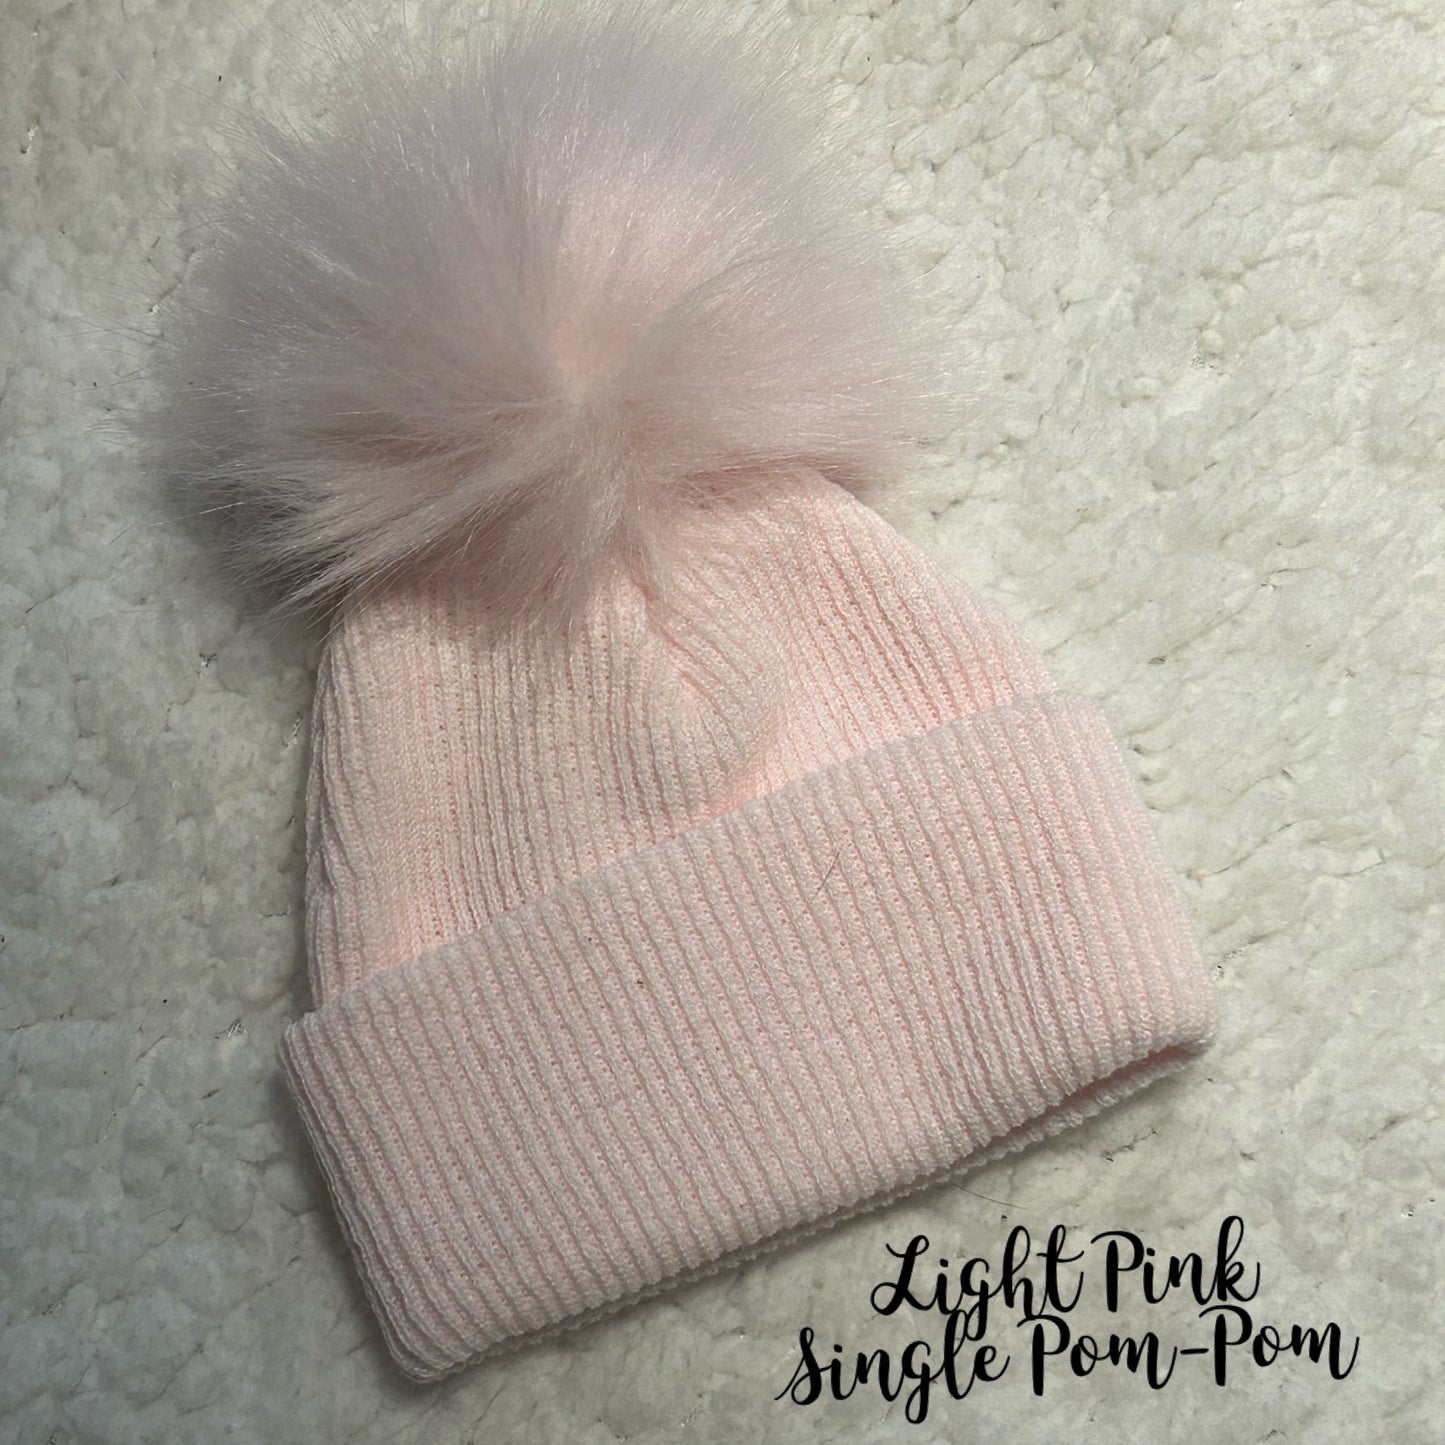 Single Pom-Pom hats (With personalised name)